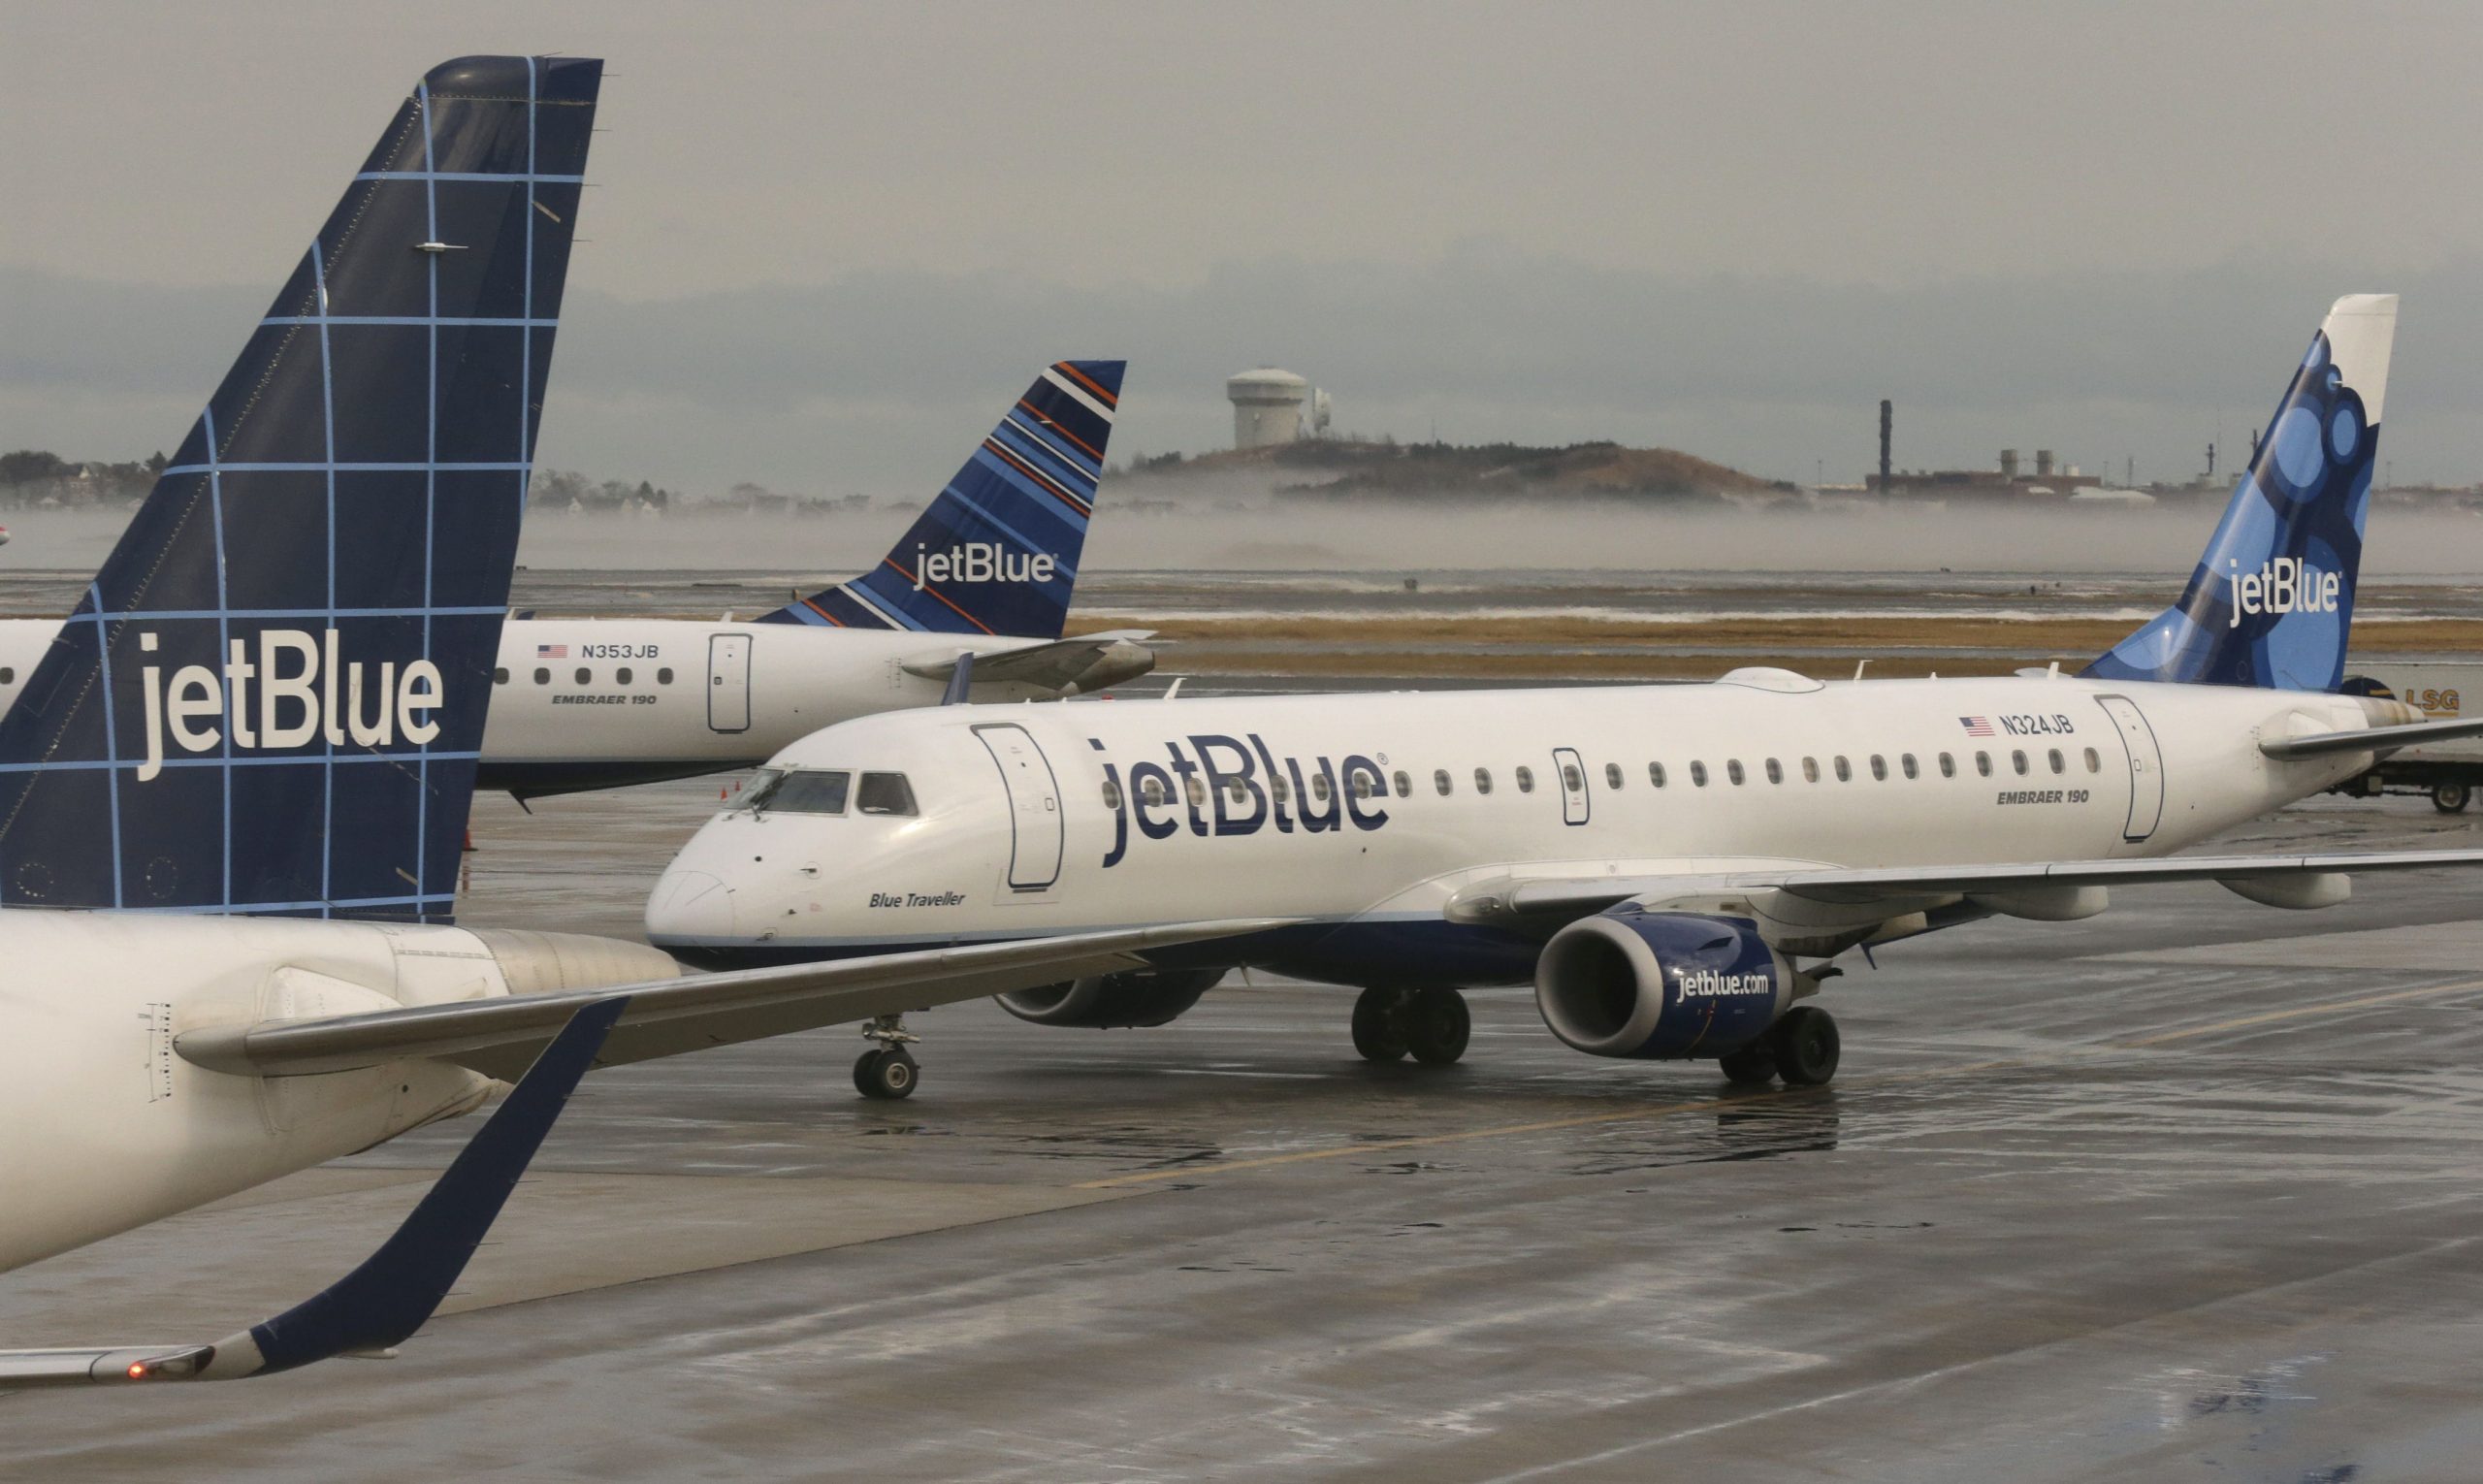 JetBlue airline company announced cancellation of the flights due to staff shortage